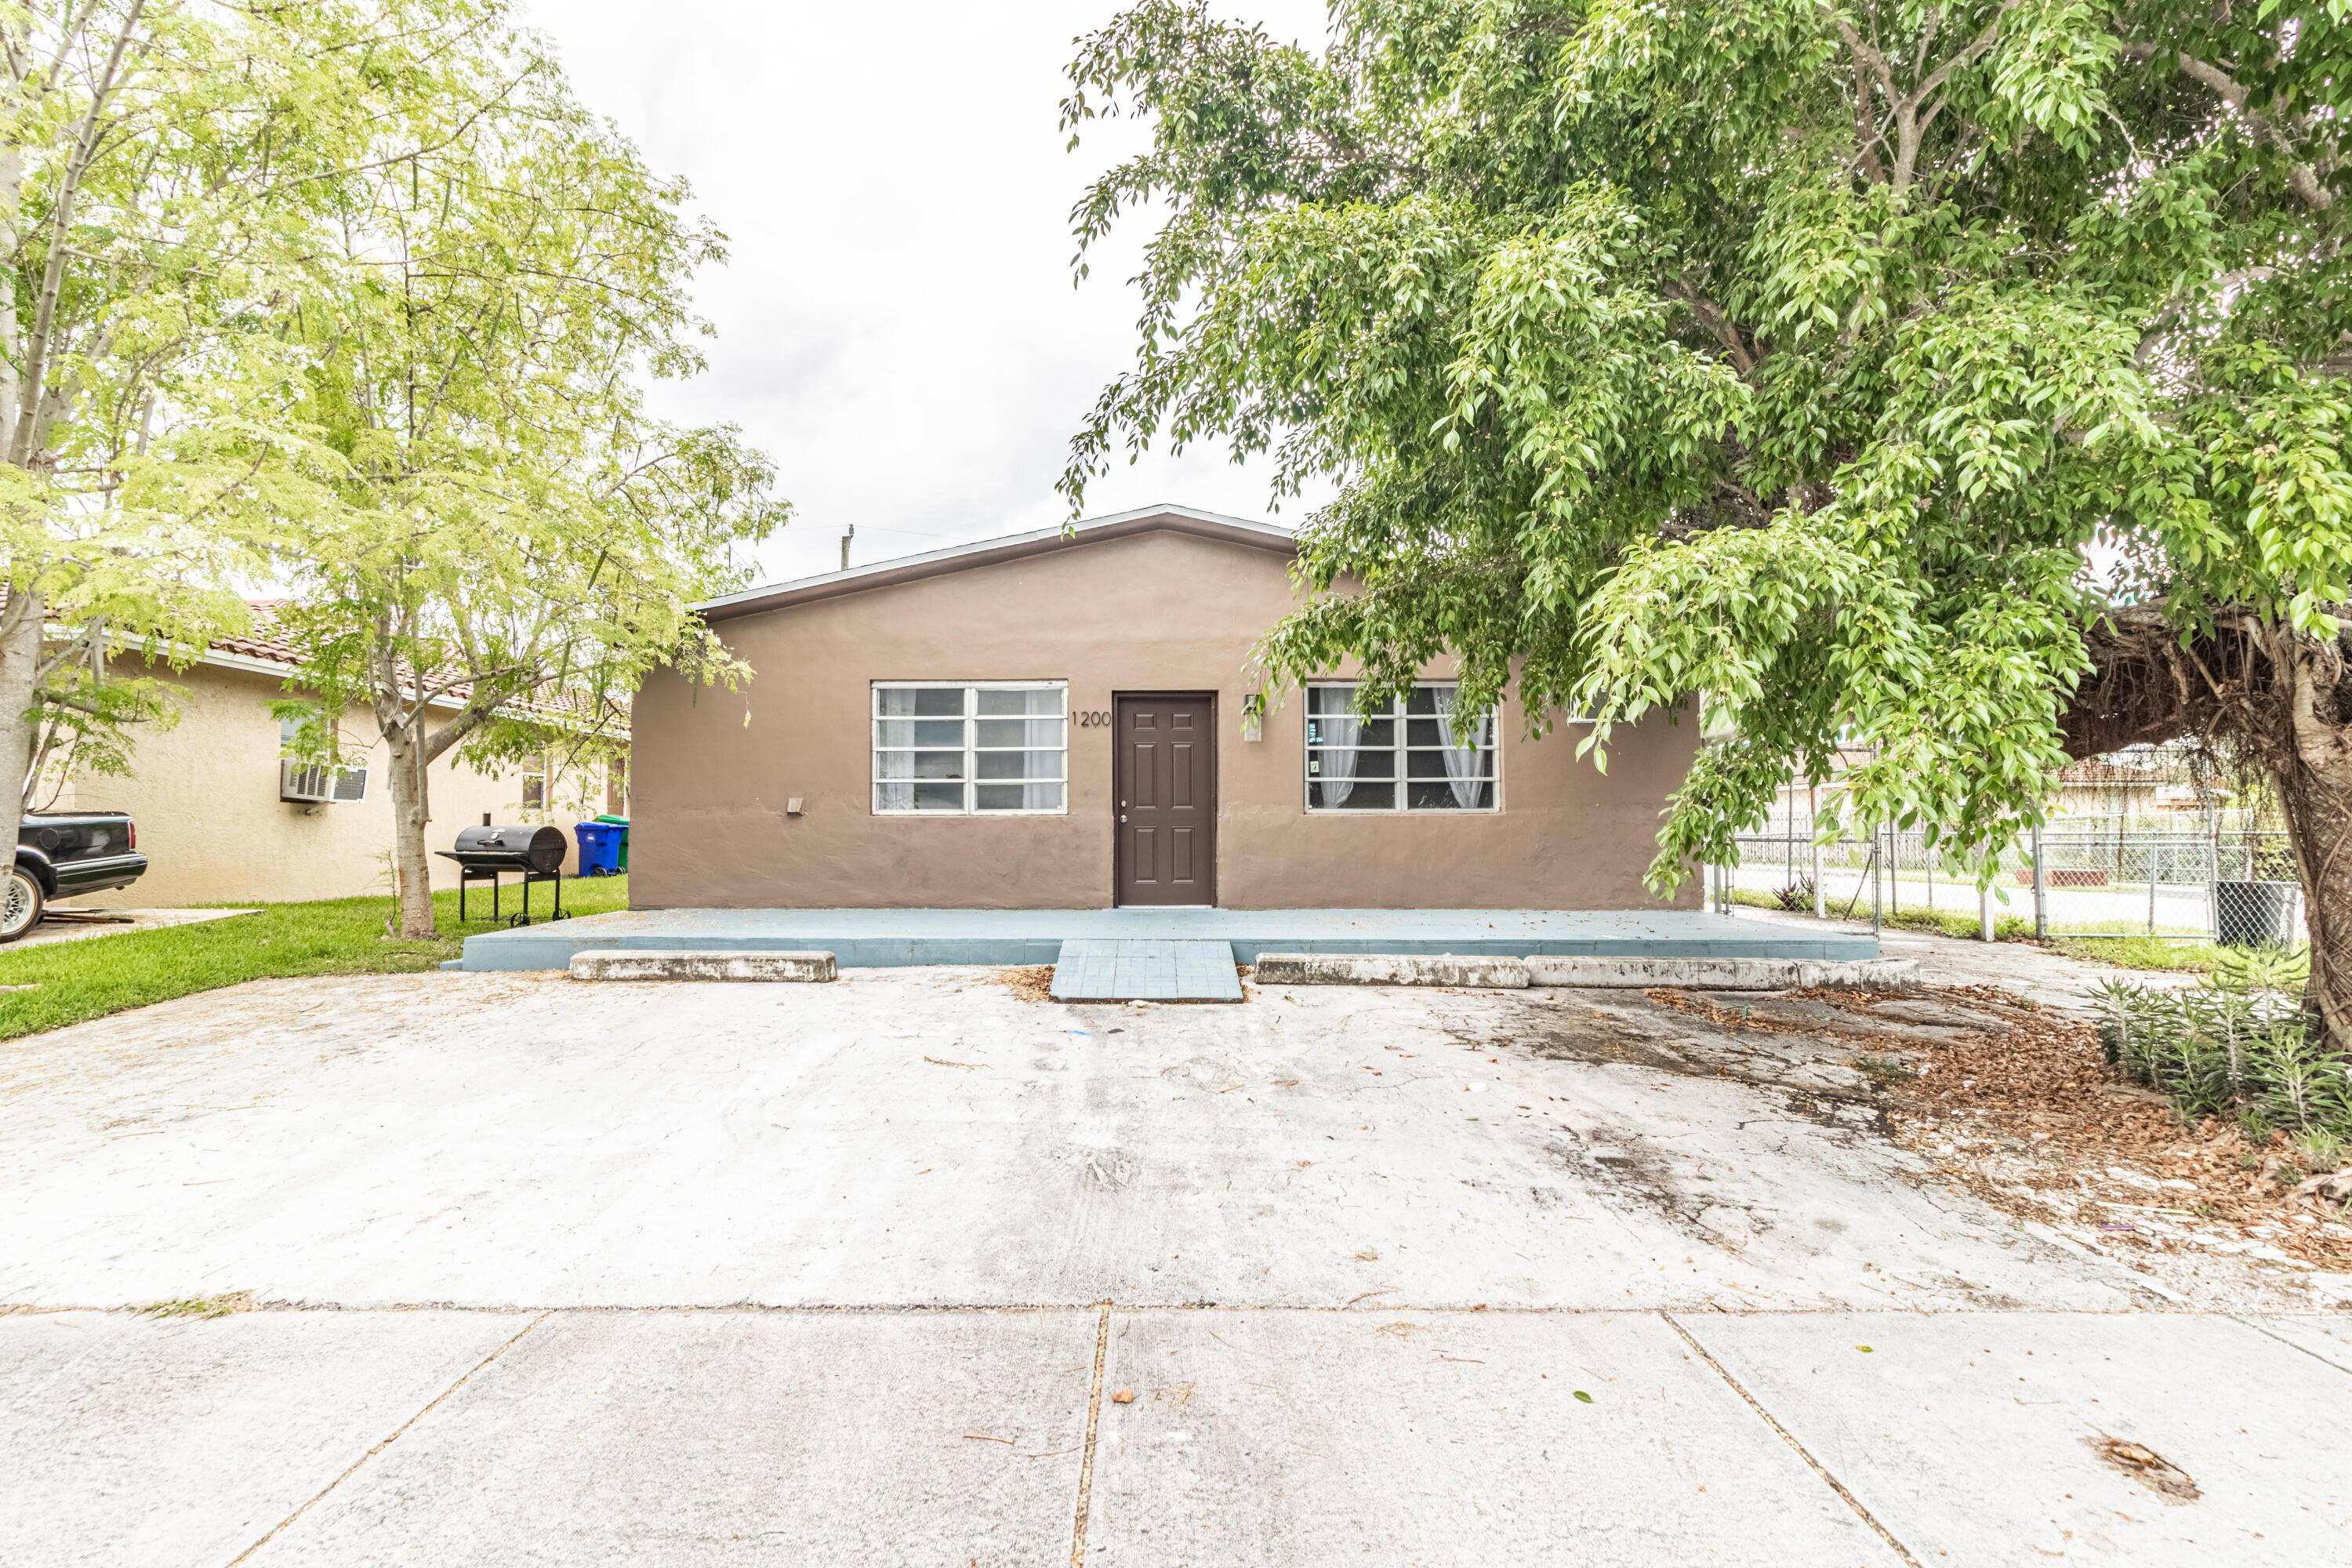 Check off every item on your wishlist in this beautifully renovated home located in the Roosevelt Gardens neighborhood just minutes from the waterfront.